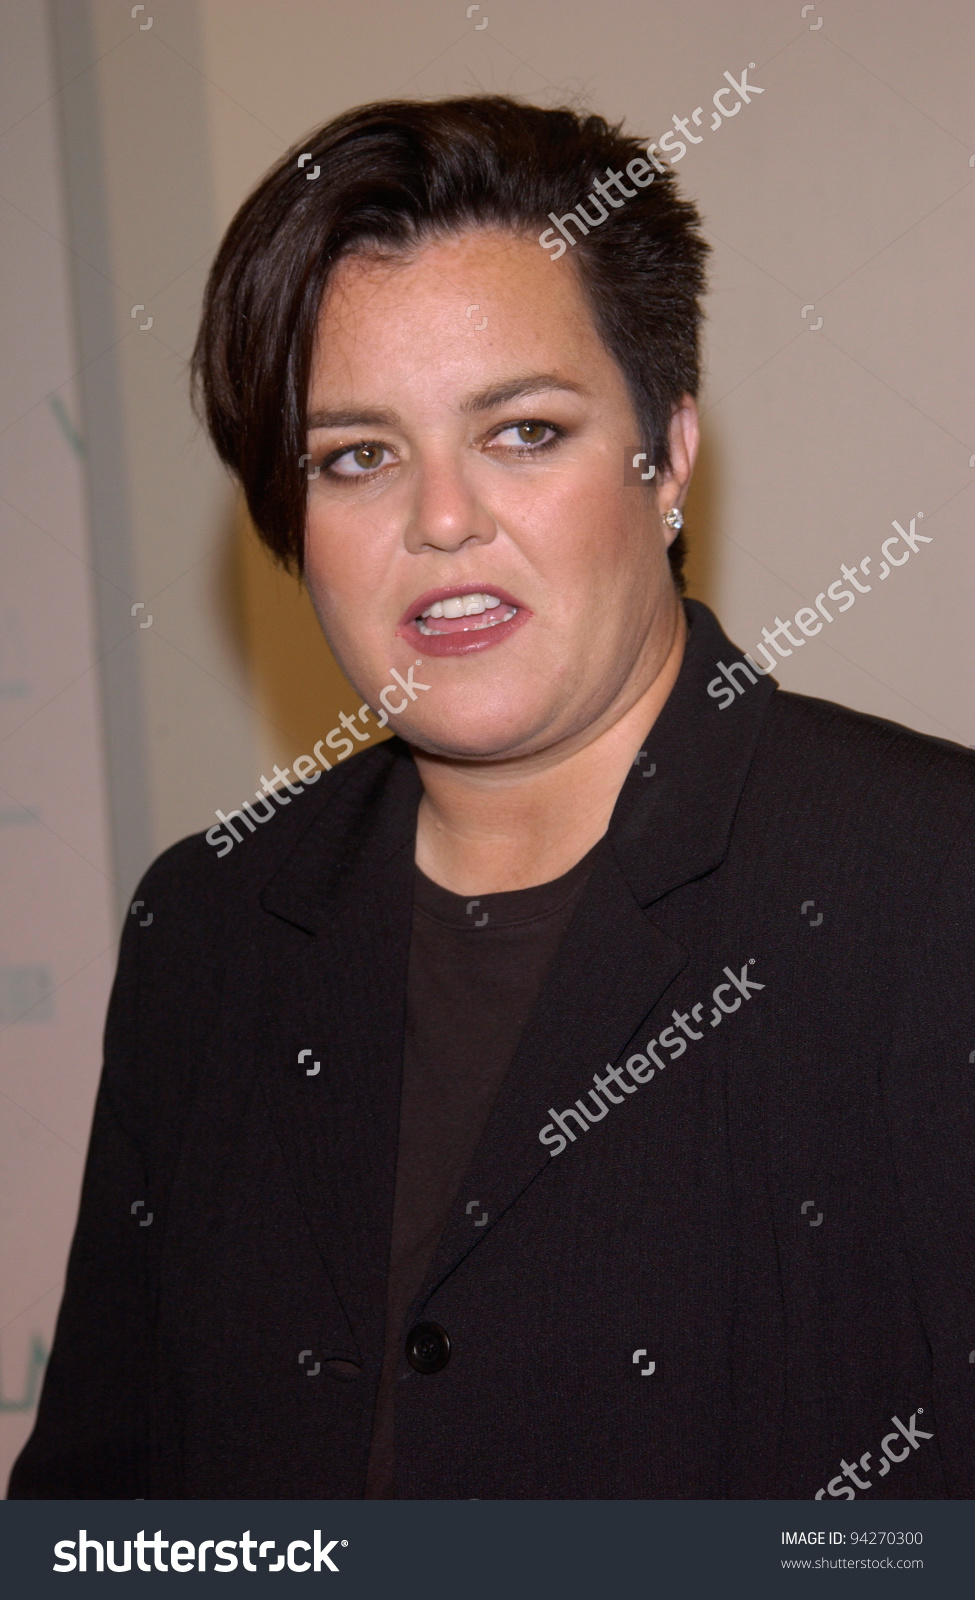 rosie-o-donnell-house